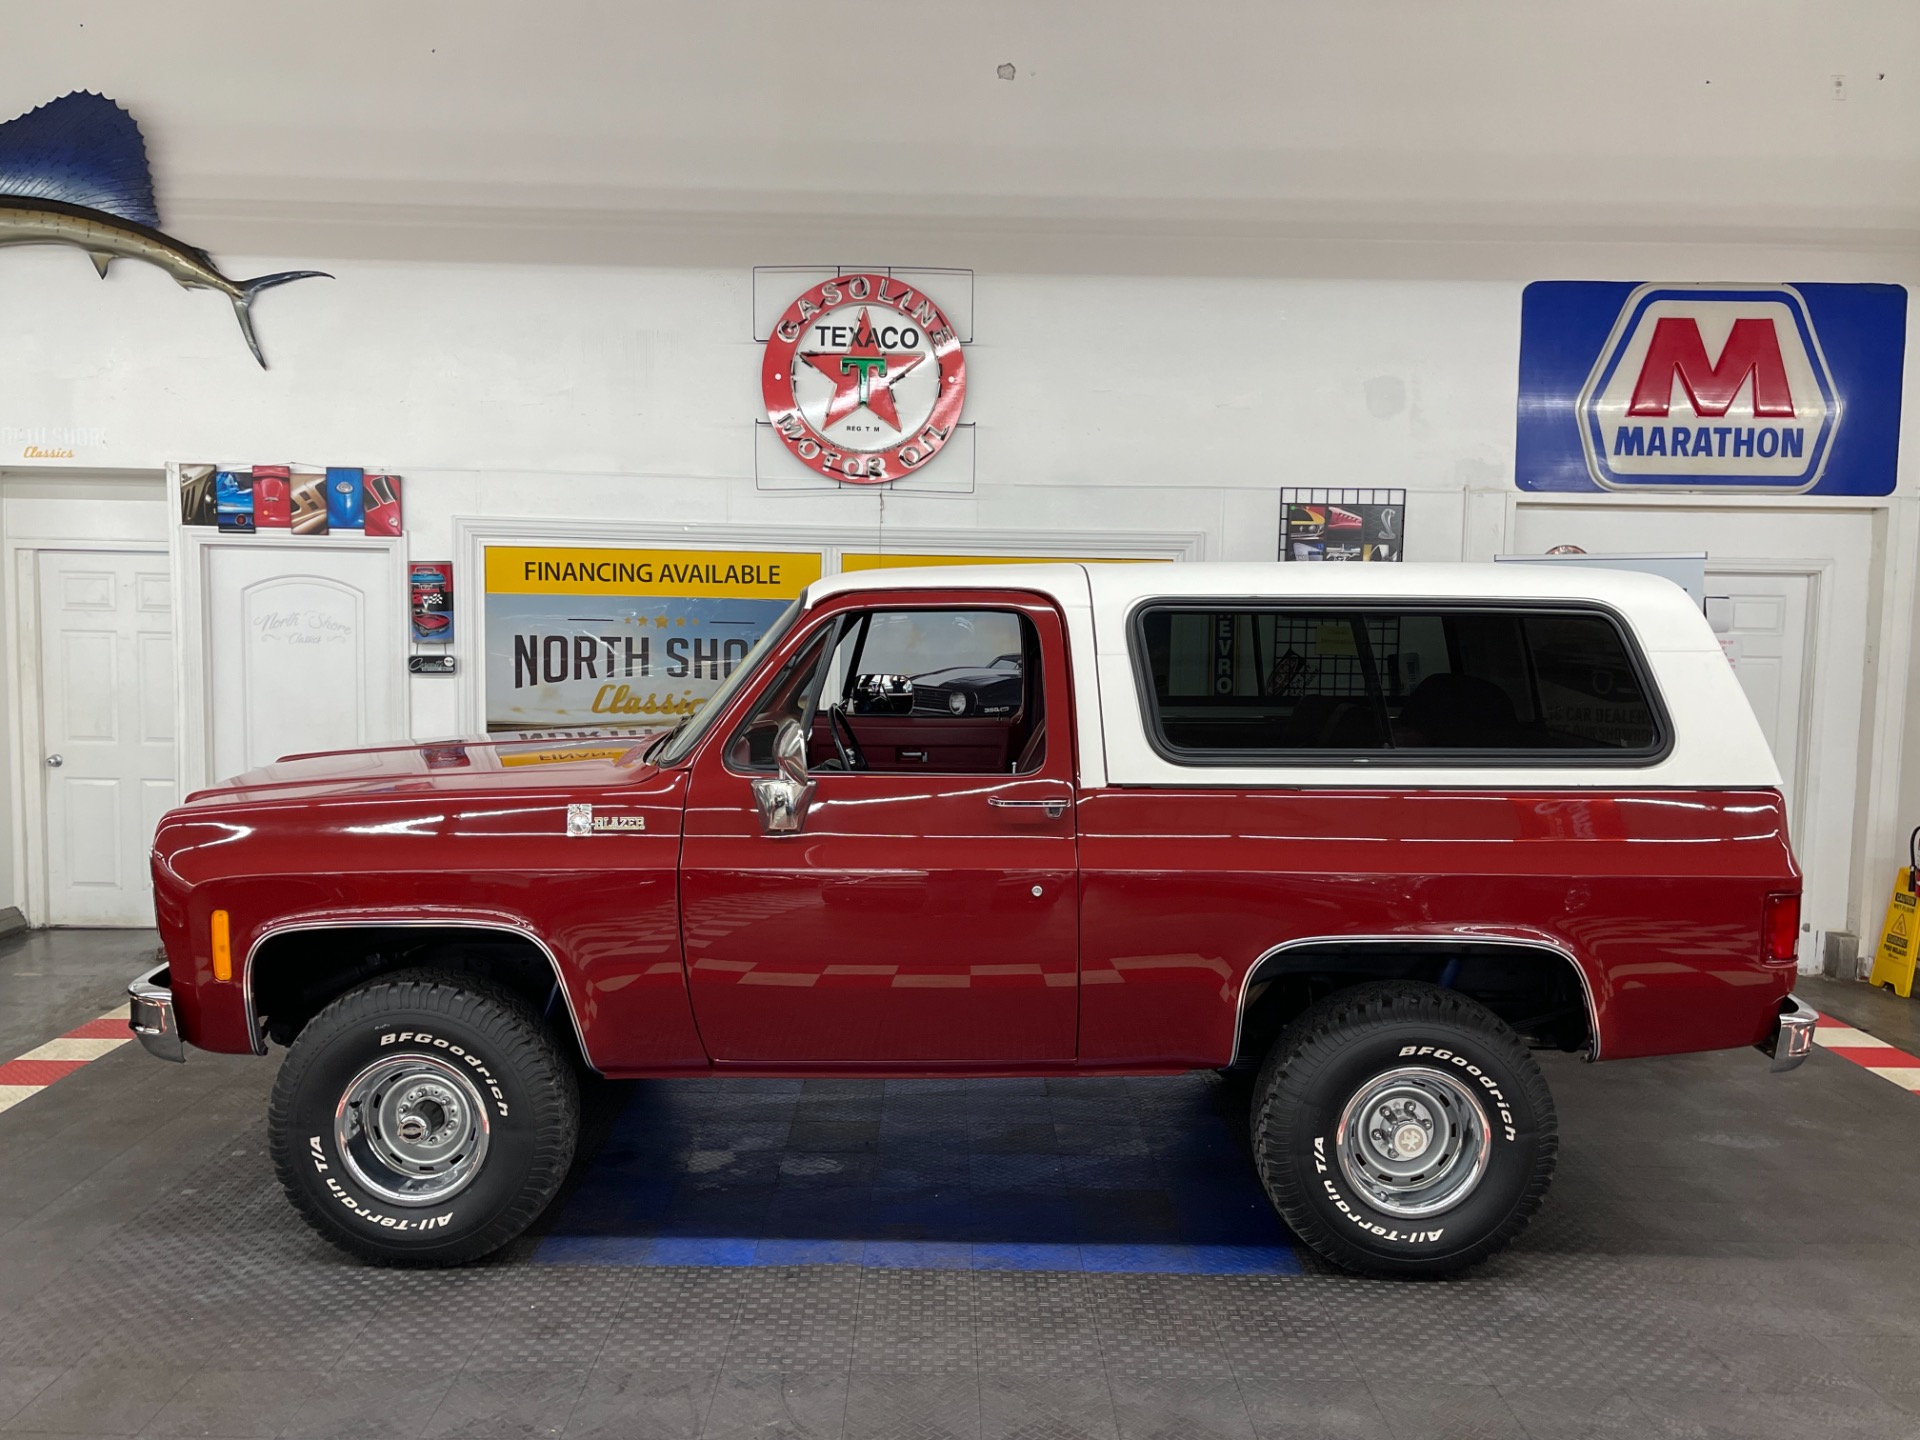 Used 1976 Chevrolet Blazer - K5 4x4 - NEW PAINT - SUPER CLEAN BODY AND FLOORS - SEE VIDEO - | Mundelein, IL